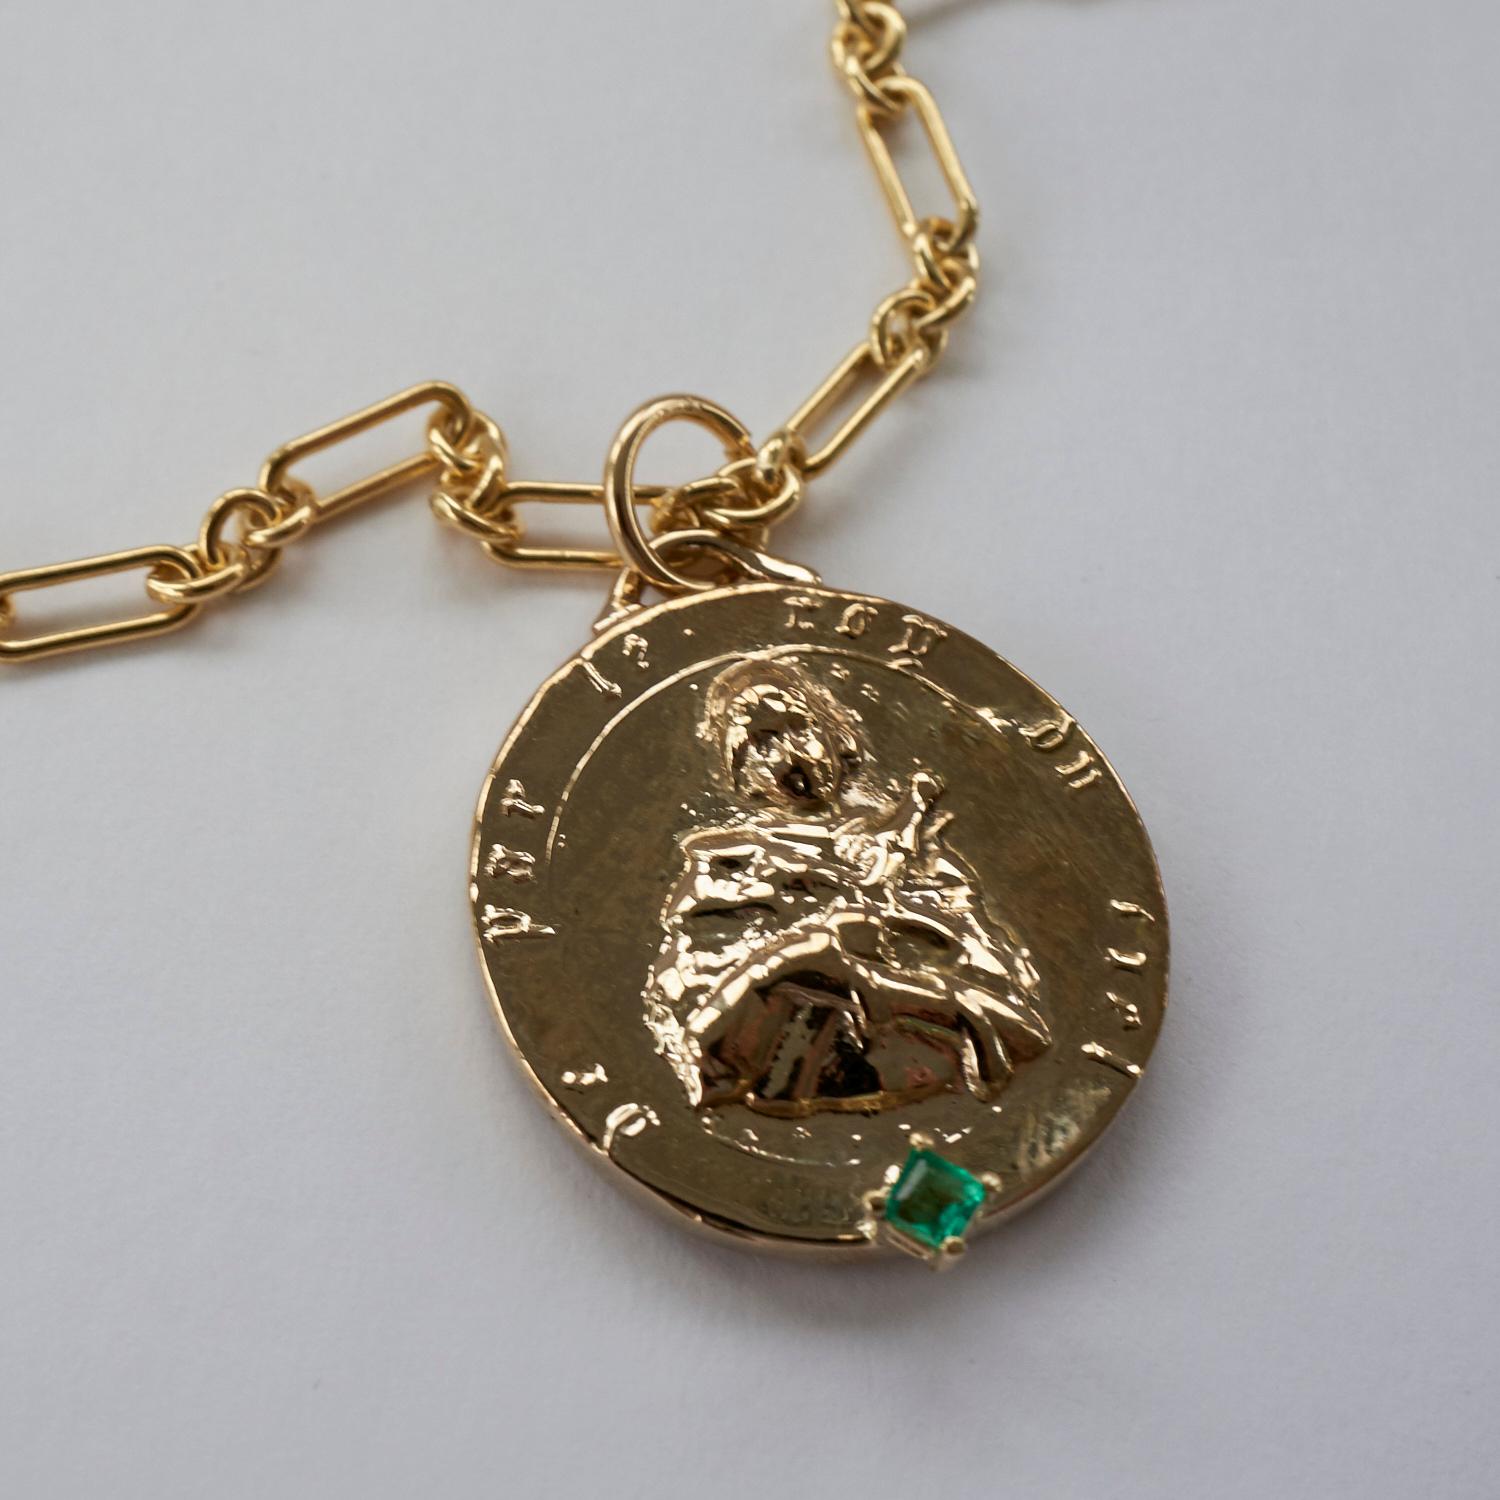 Square Cut Emerald Medal Long Chunky Chain Necklace Saint Joan of Arc J Dauphin For Sale